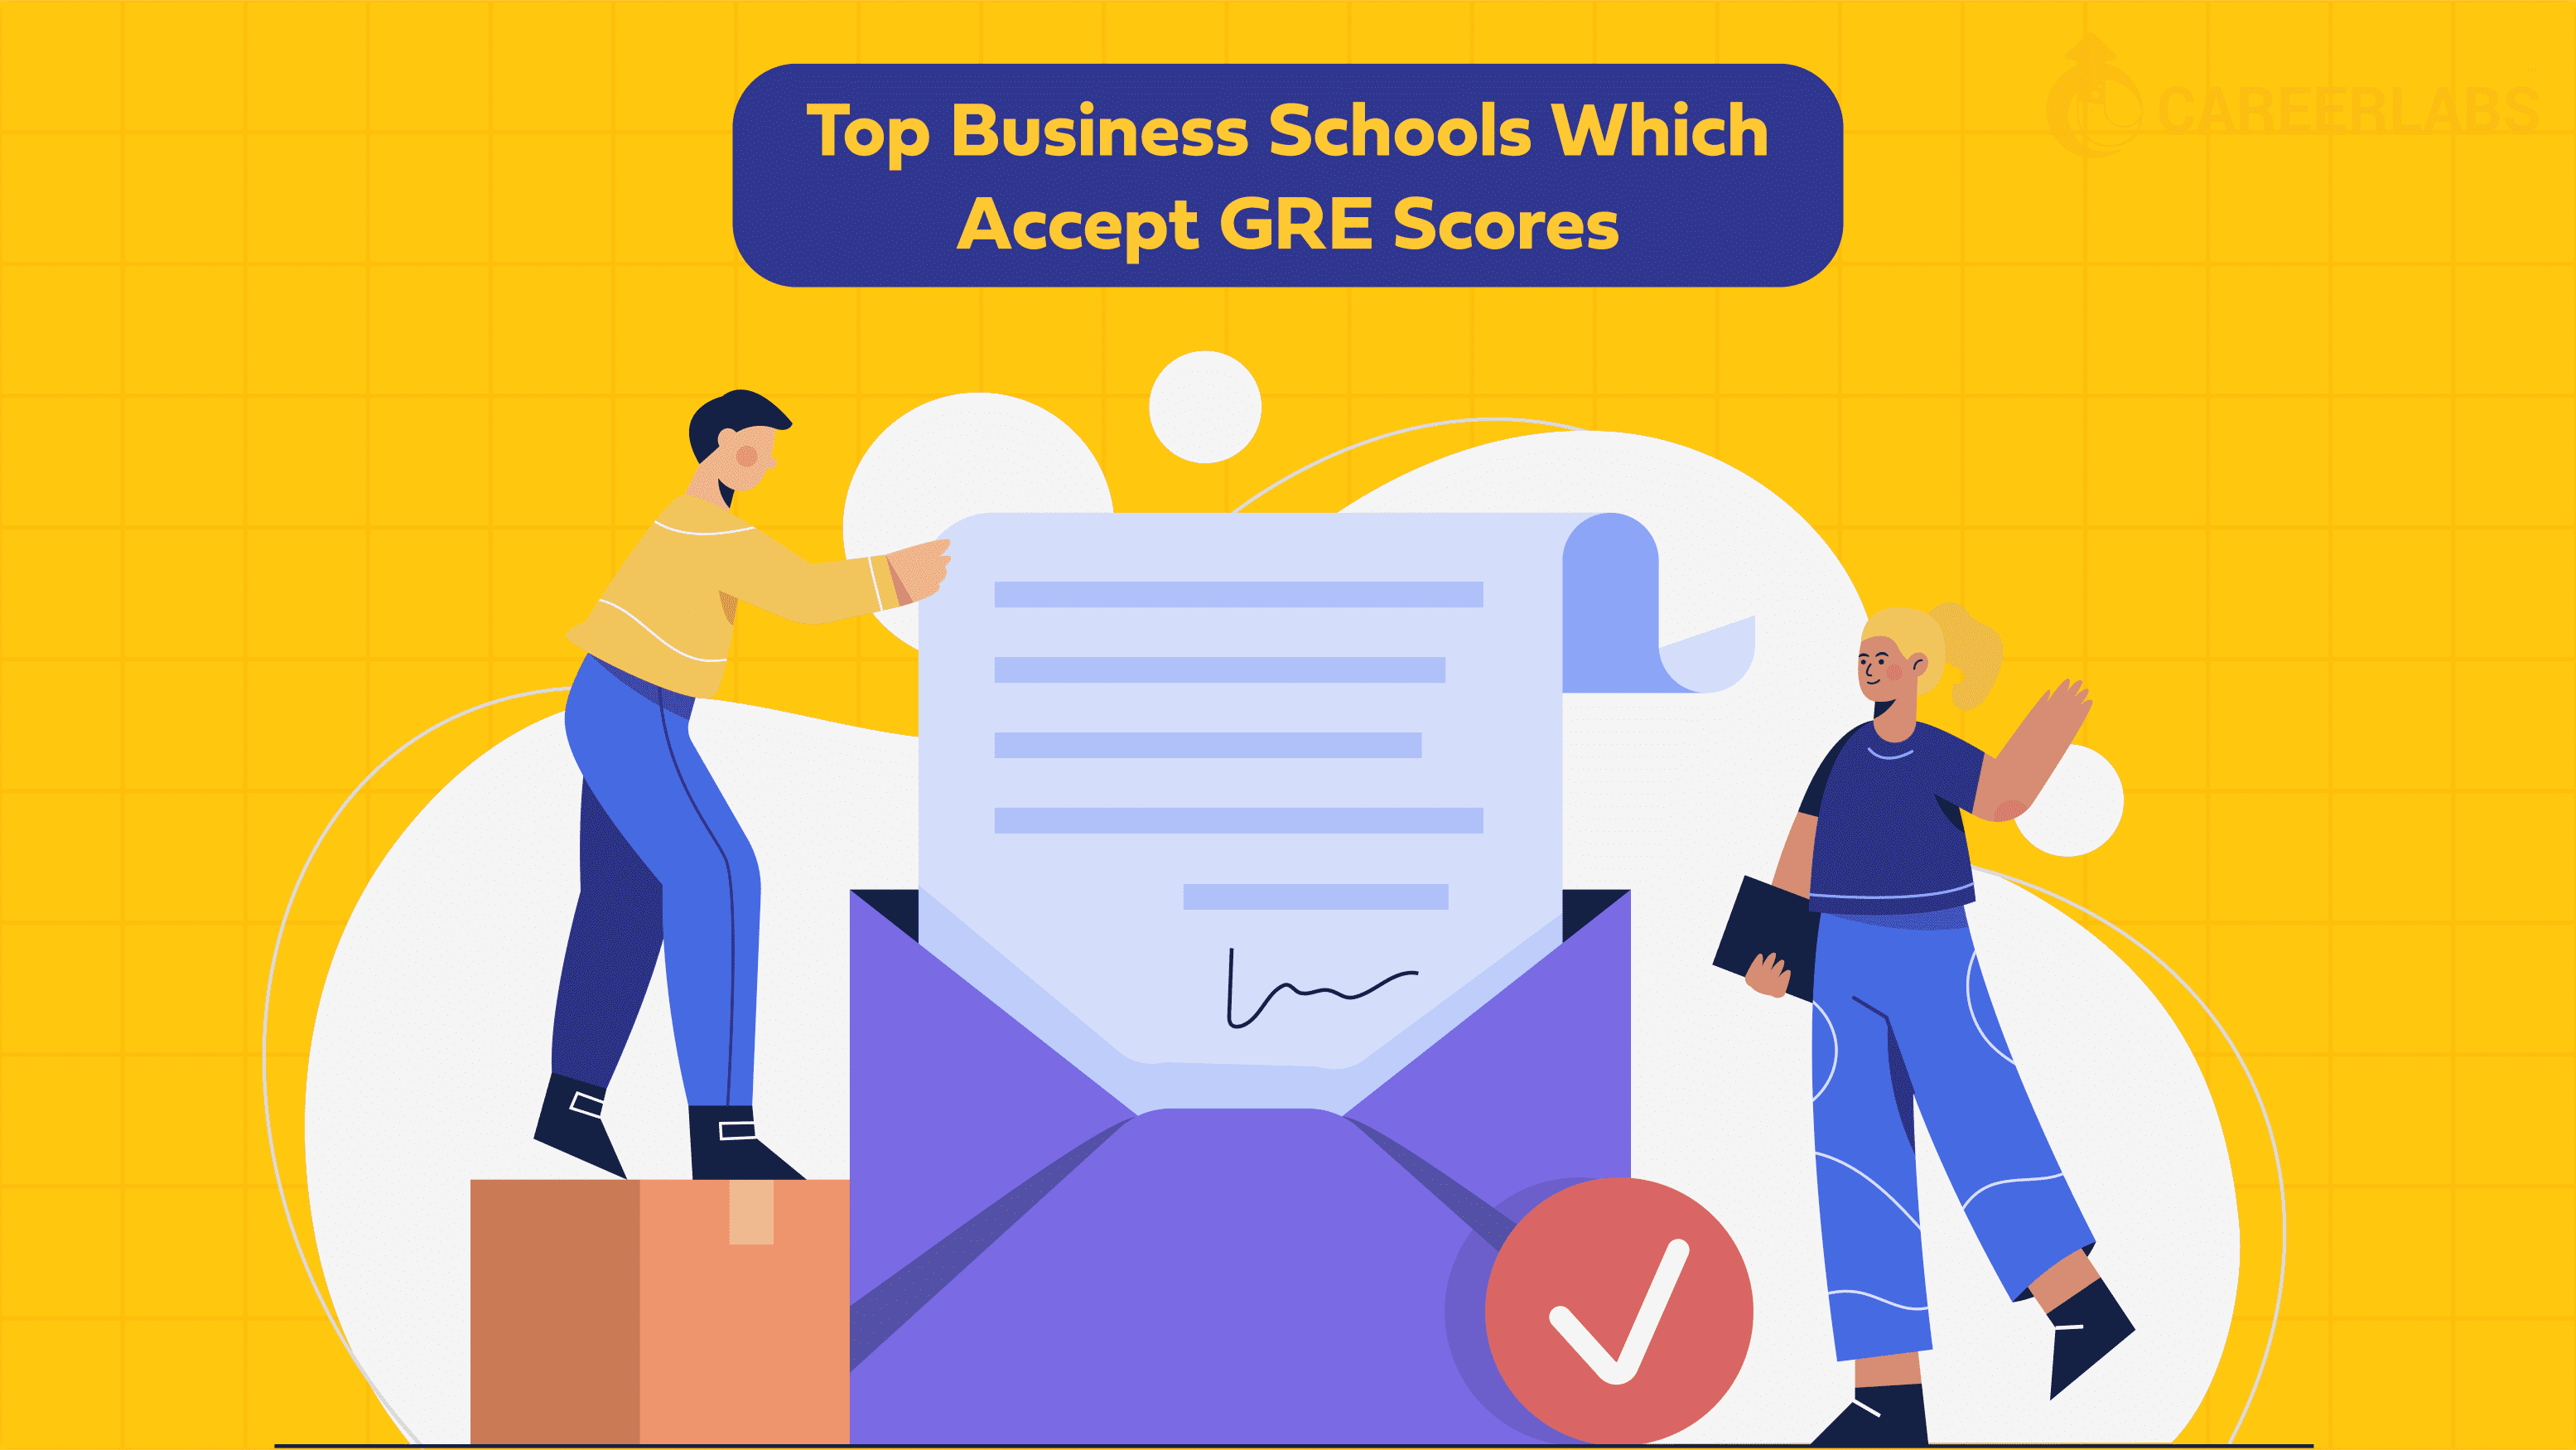 Top Business Schools which Accept GRE scores